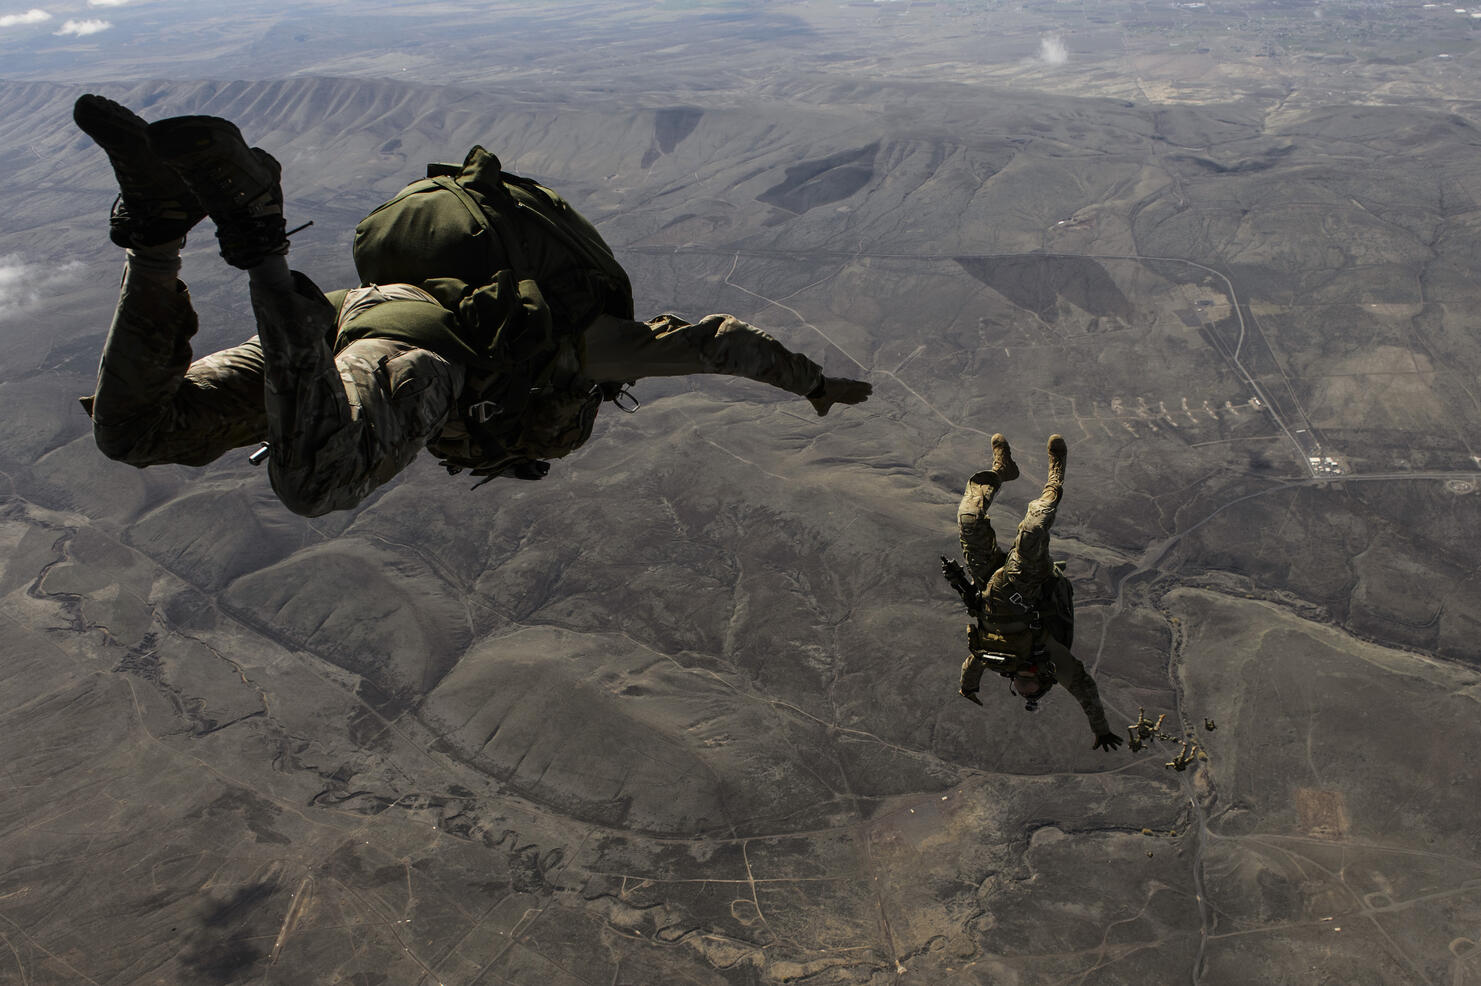 U.S. Army soldiers conduct a HALO jump over Washington.